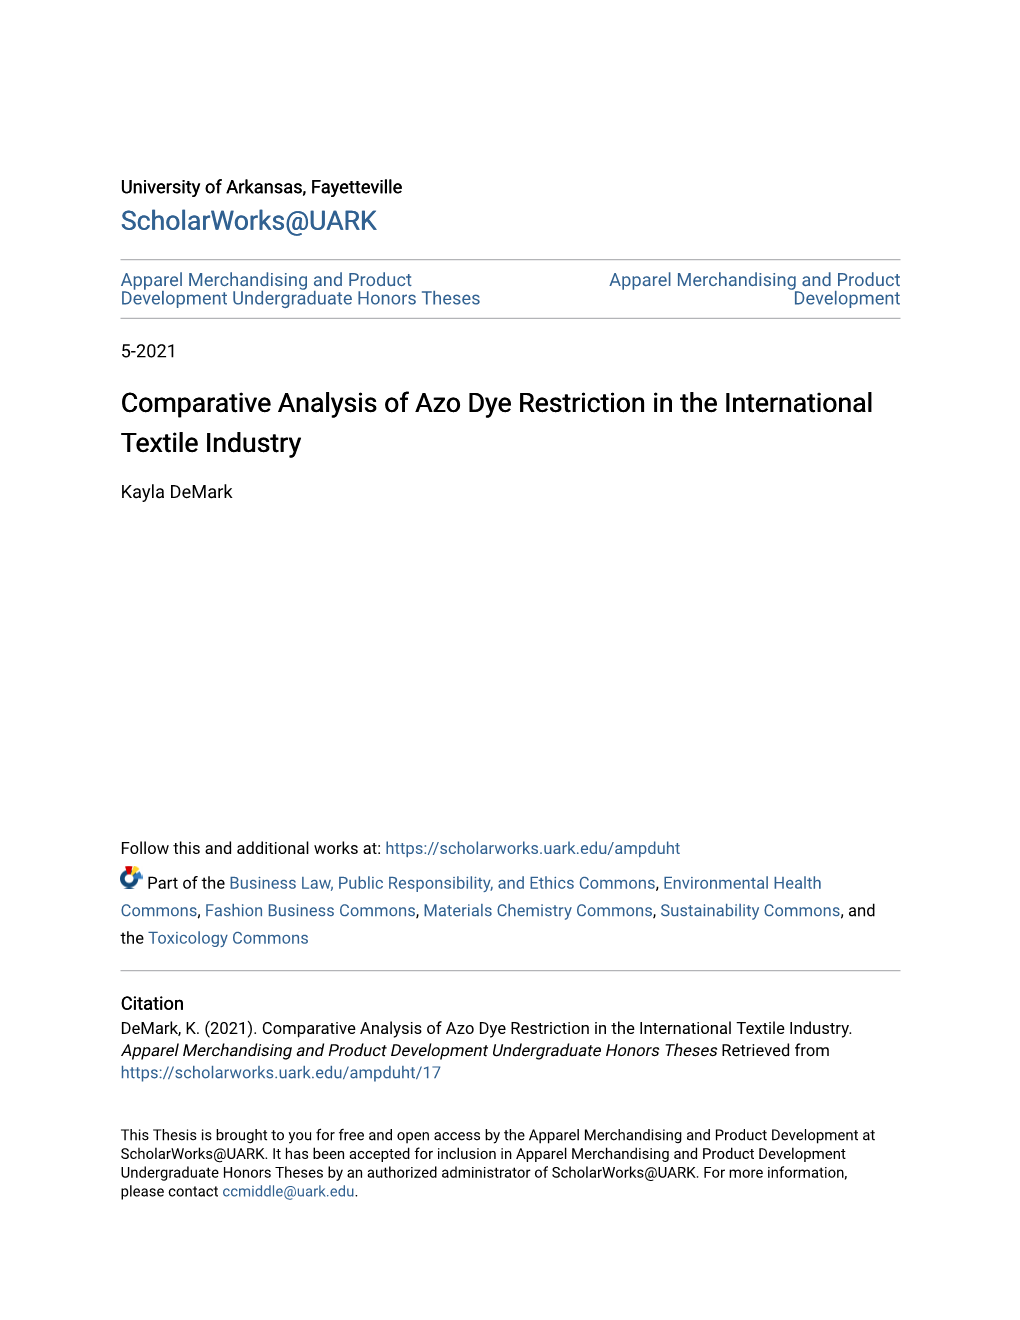 Comparative Analysis of Azo Dye Restriction in the International Textile Industry